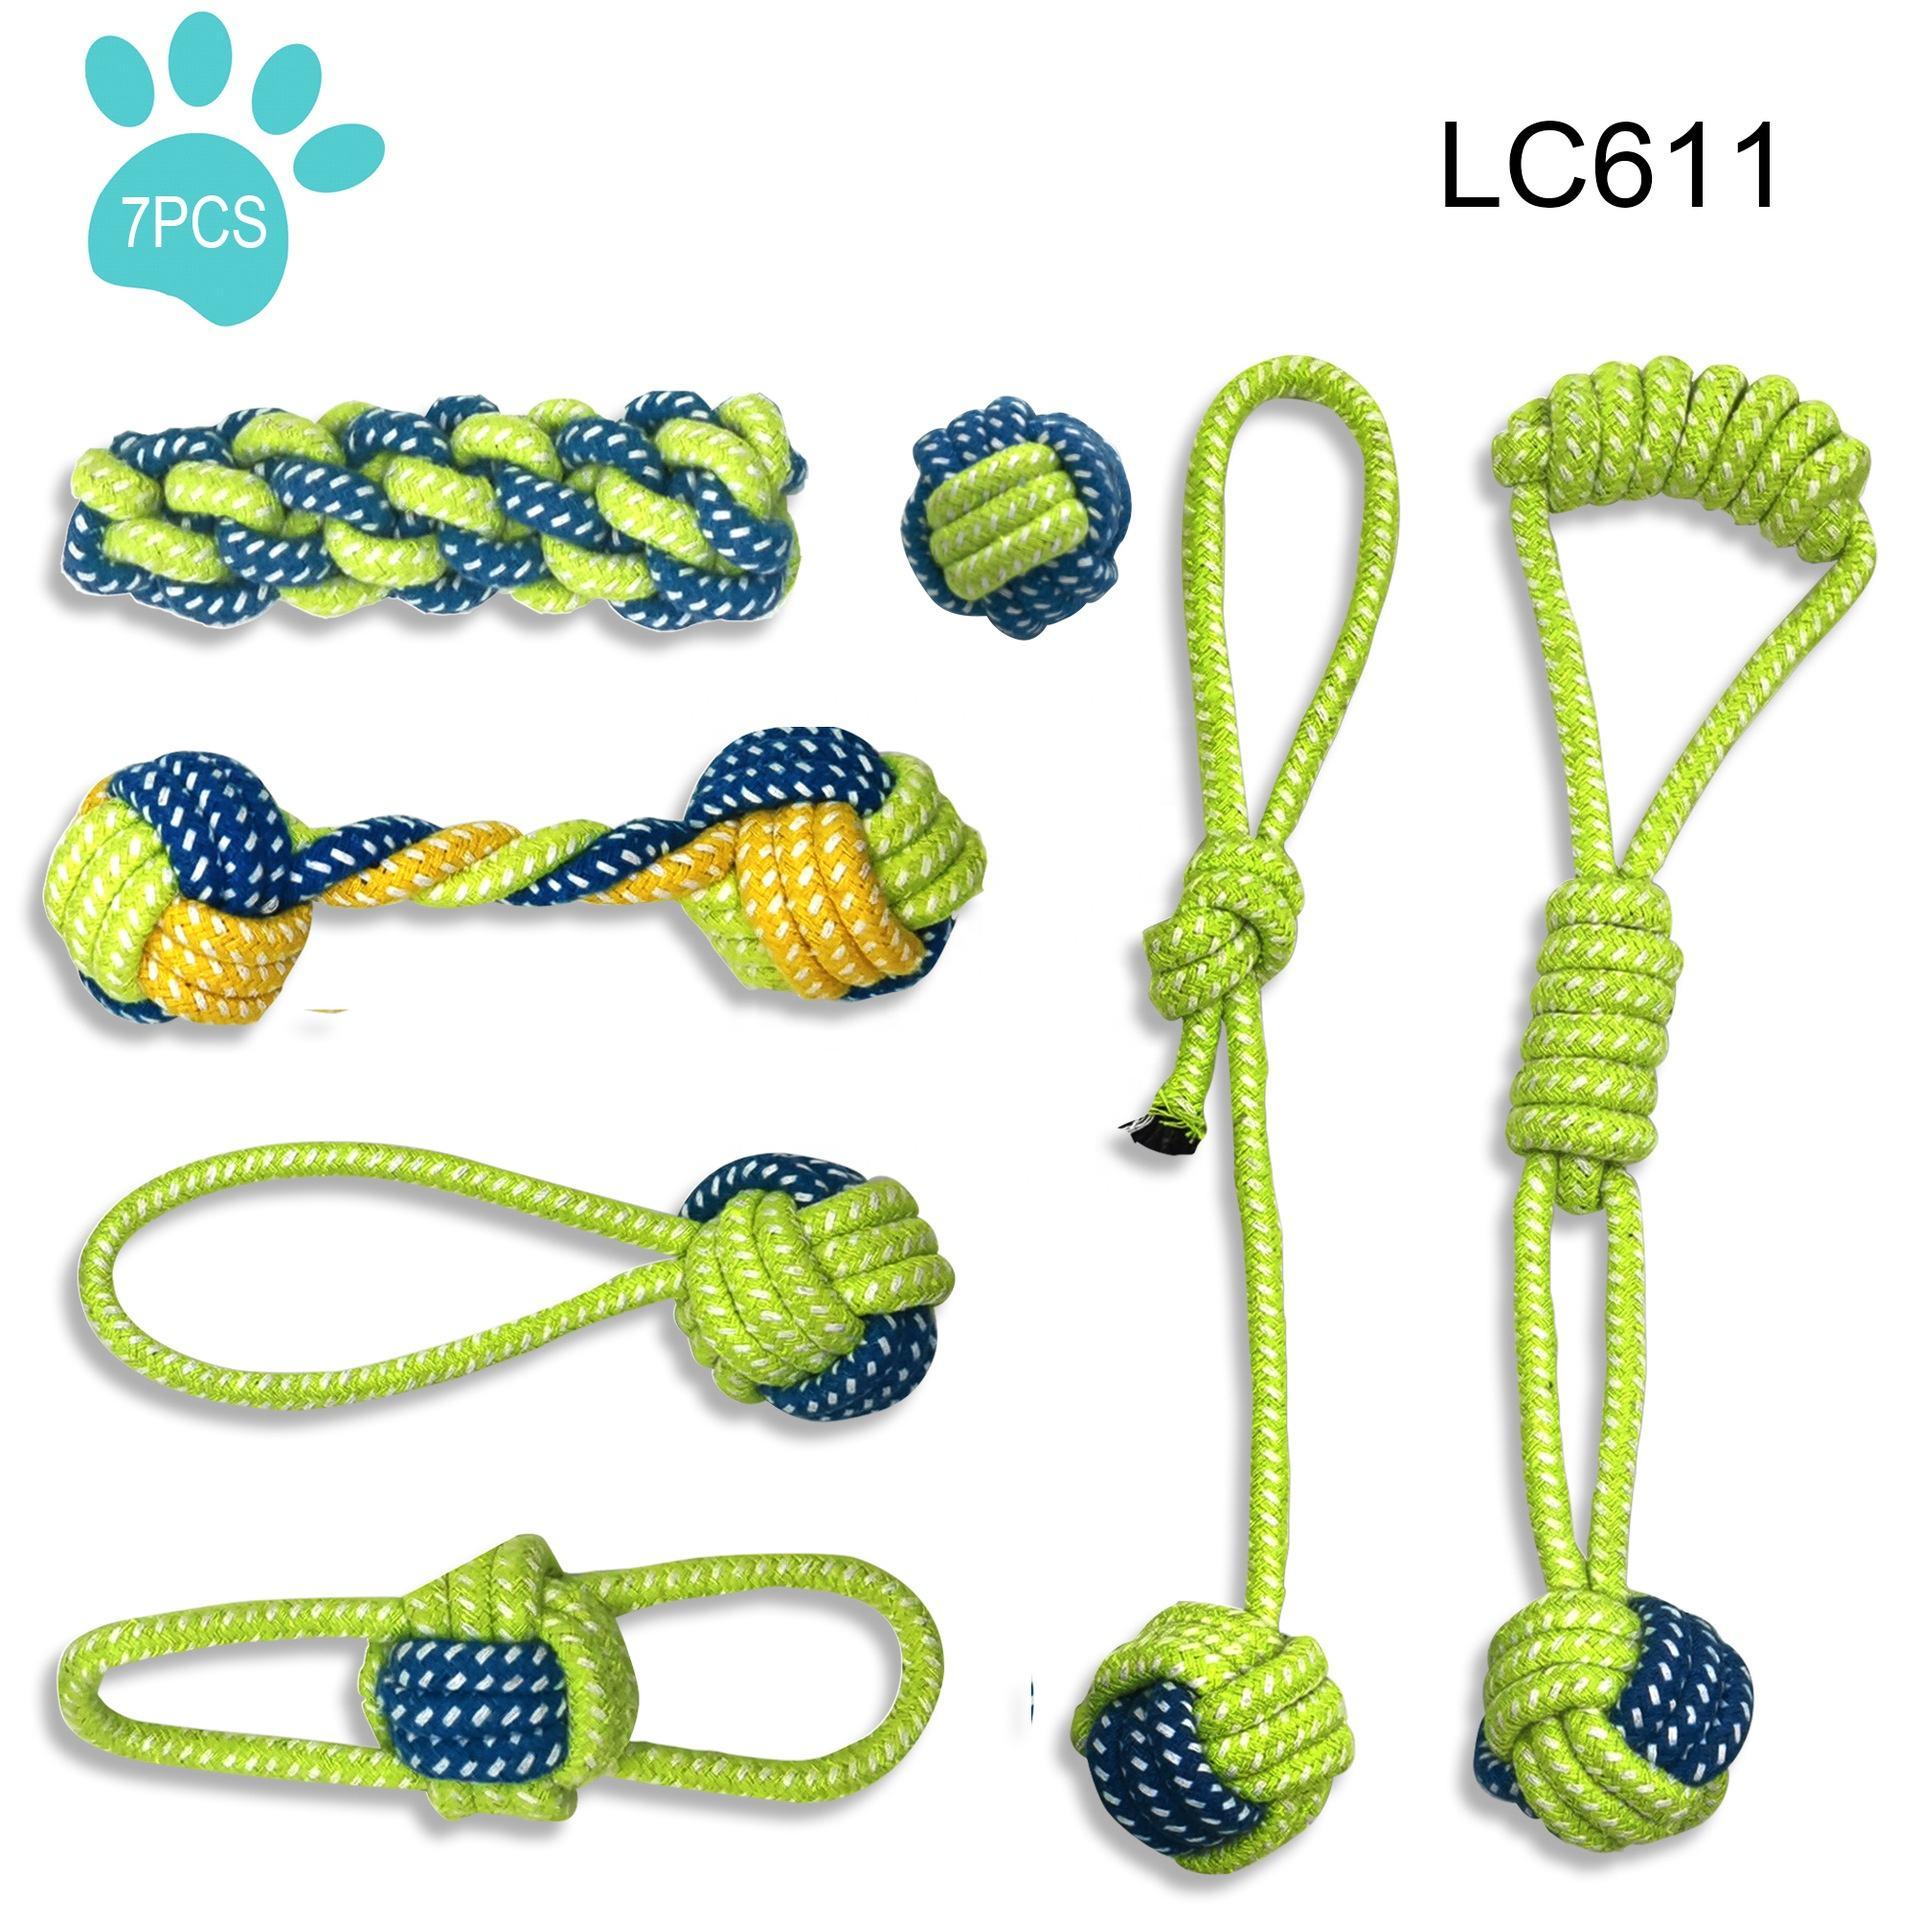 Wholesale Custom Soft Dog Cotton Rope Toy 18 Pack Pet Cat Dog Chew Toy Set For Teeth Cleaning